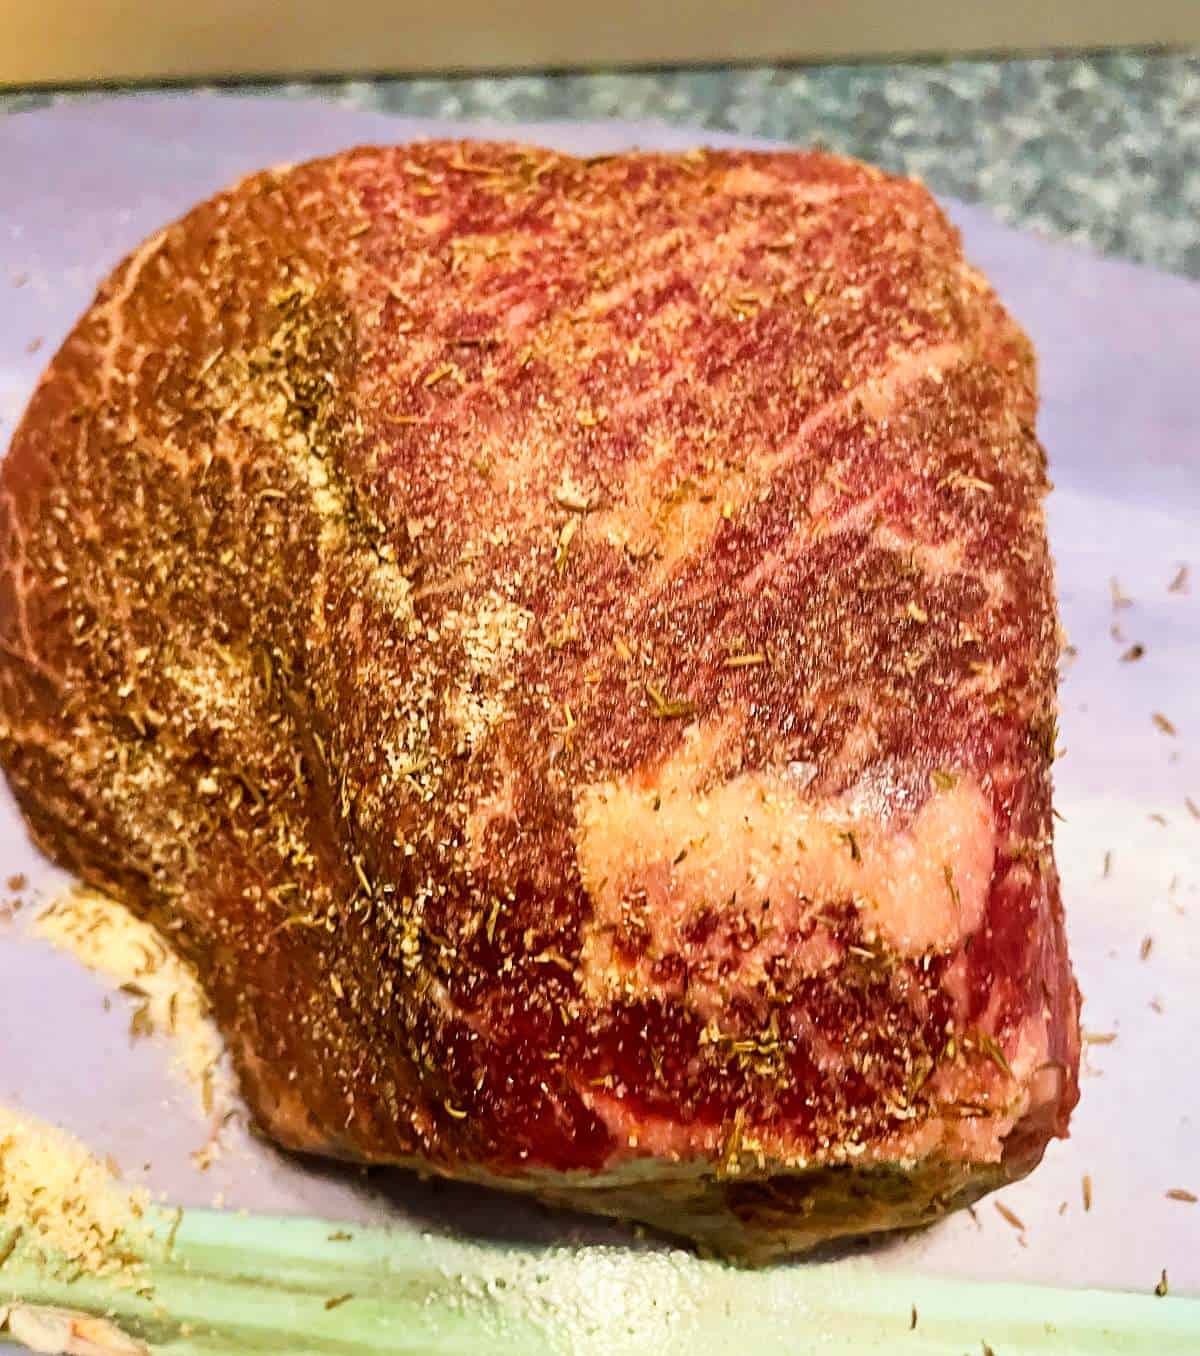 raw top round roast beef with spice rub applied.